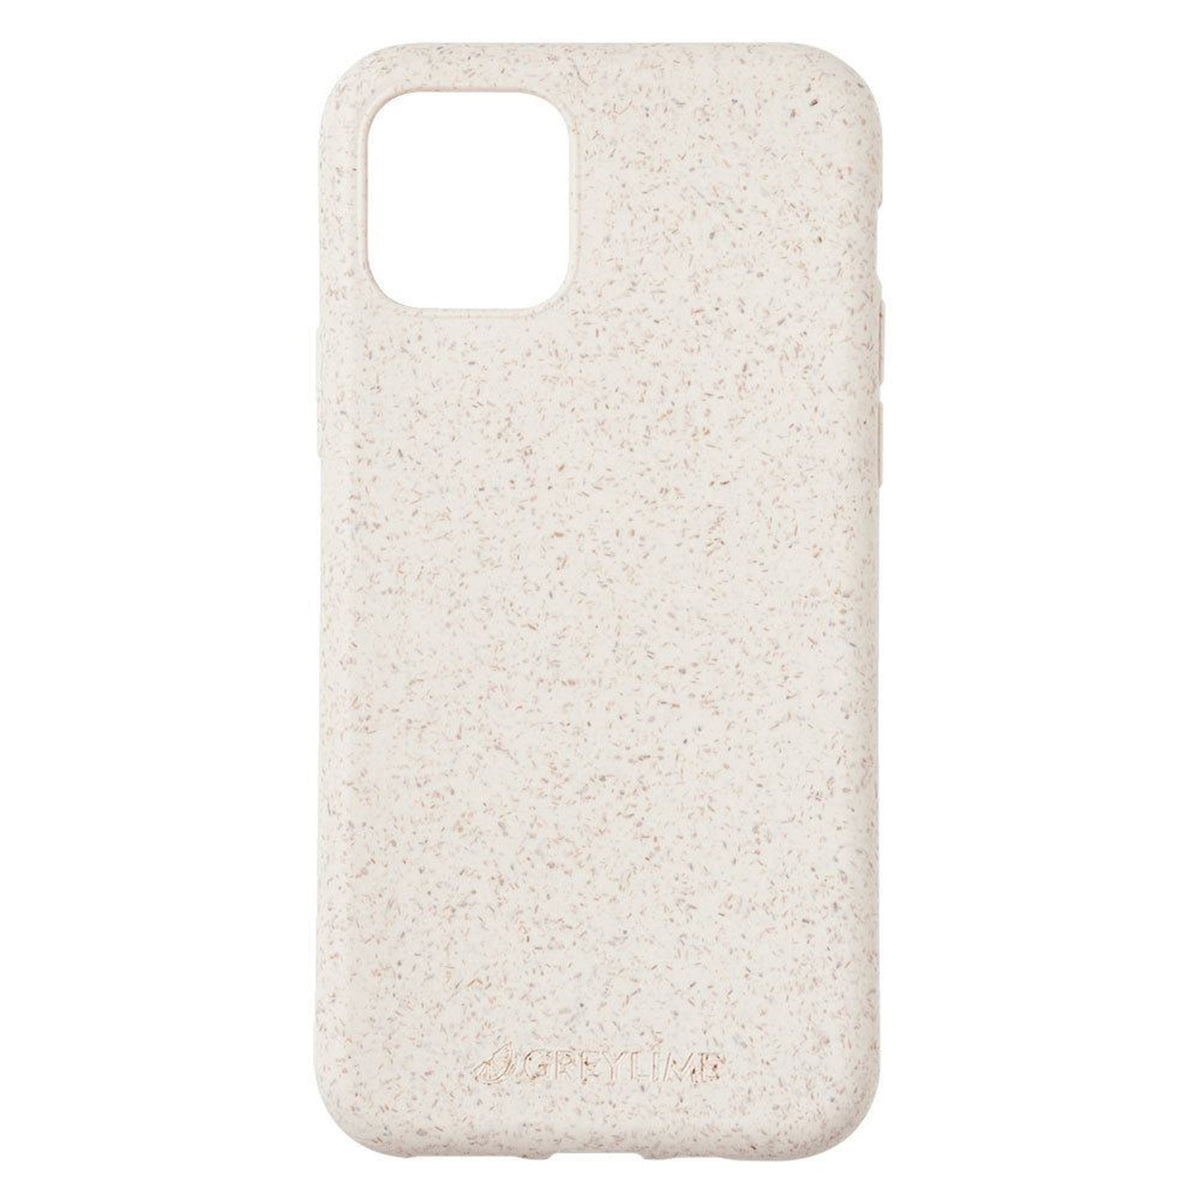 GreyLime-iPhone-11-Pro-biodegradable-cover-Beige-COIP11P02-V4.jpg